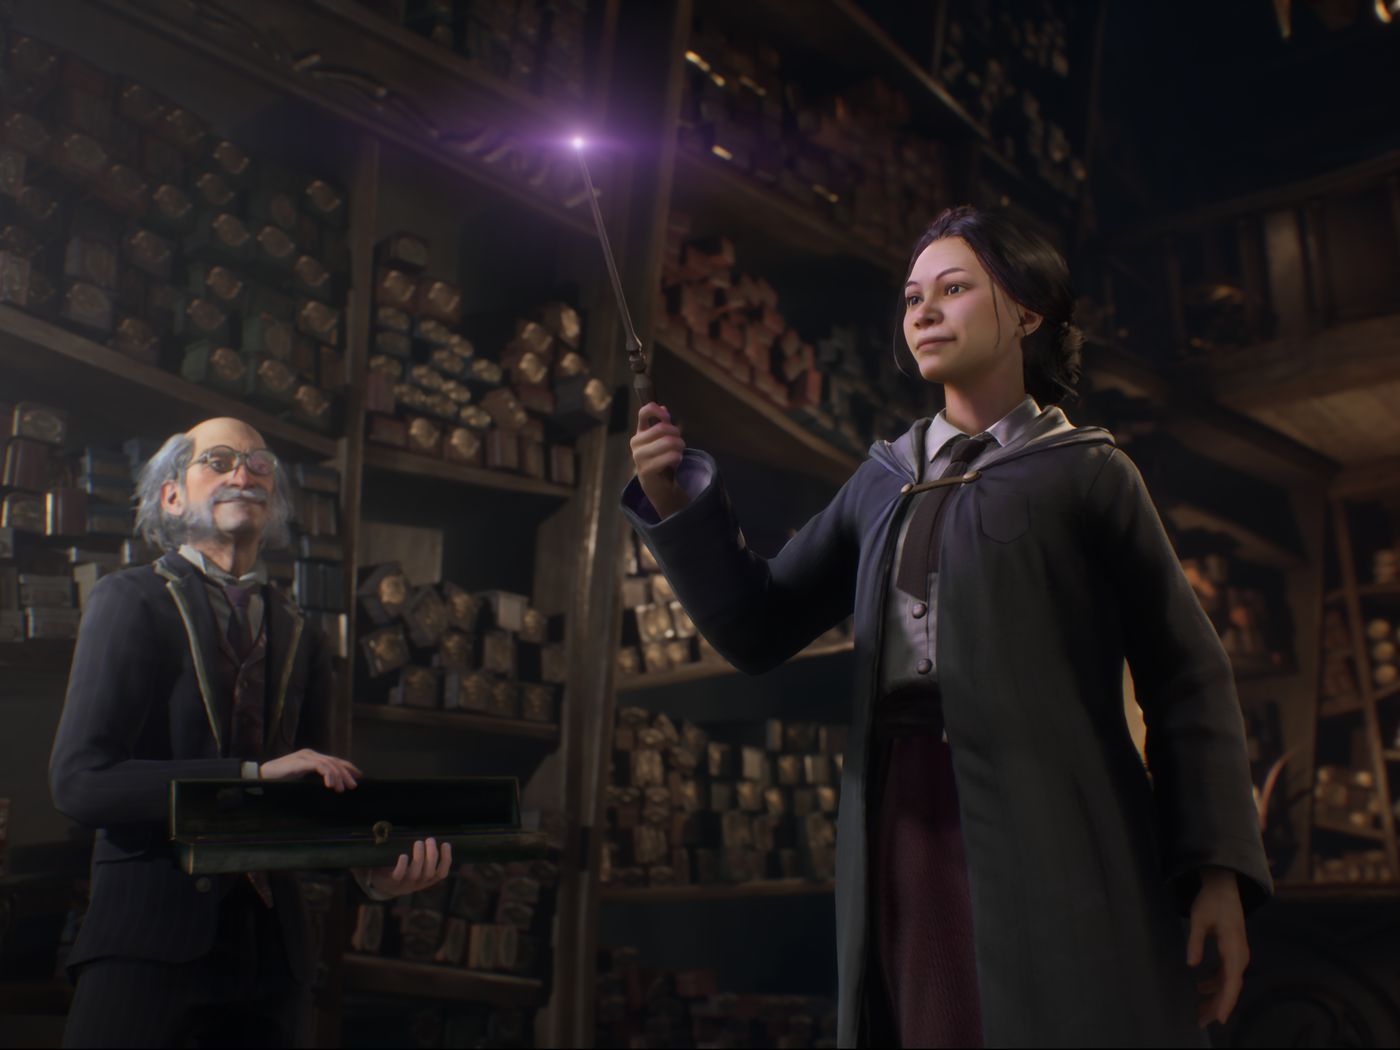 J.K. Rowling 'not directly involved' in Hogwarts Legacy game, WB says